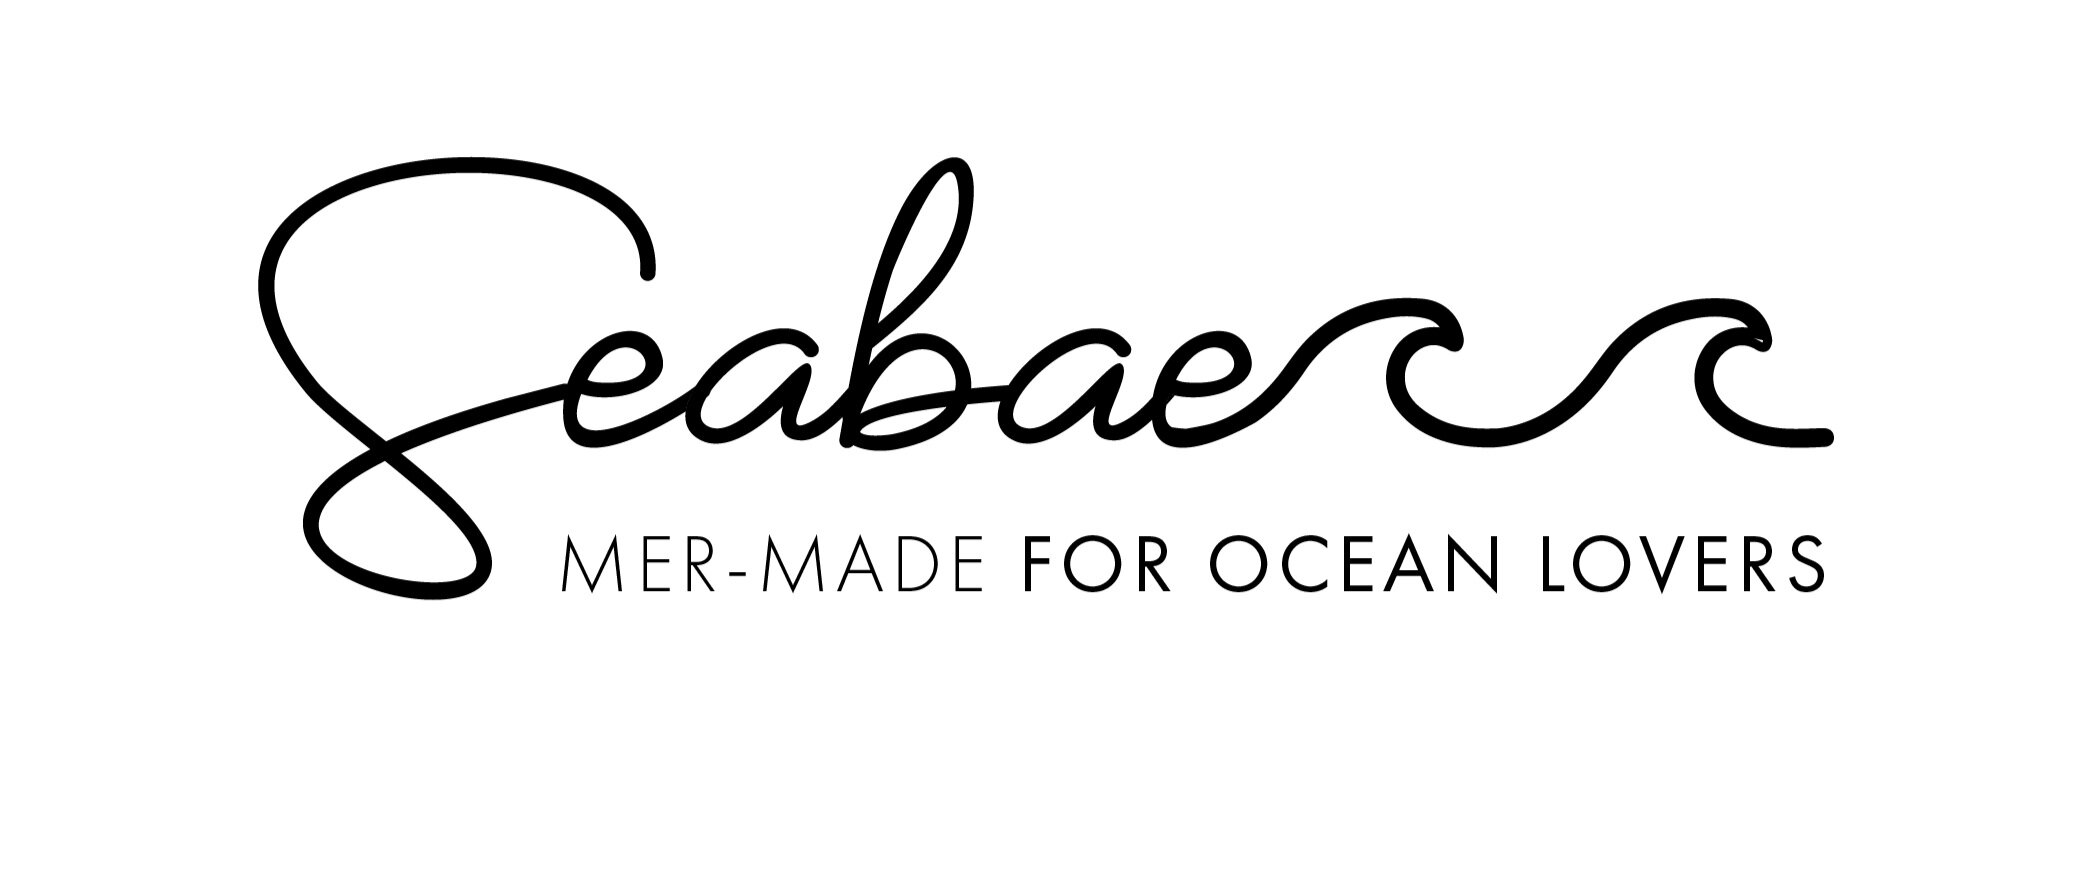 SeaBae Beauty makes beauty products that help save baby sea turtles with every purchase.